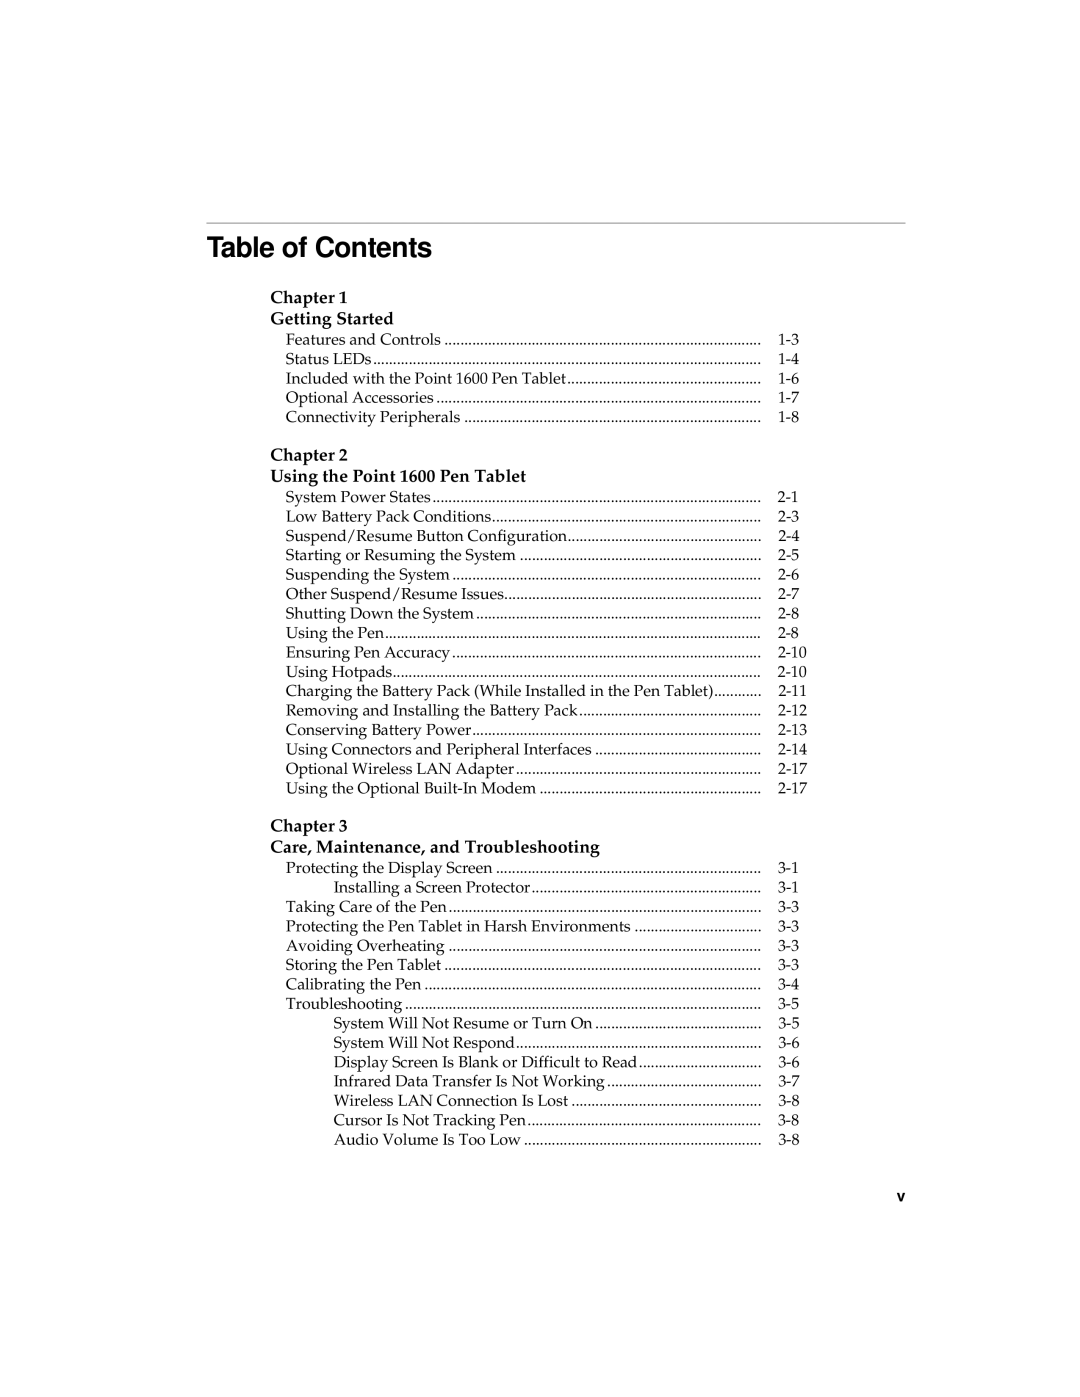 Fujitsu manual Table of Contents, Chapter Getting Started, Chapter Using the Point 1600 Pen Tablet 